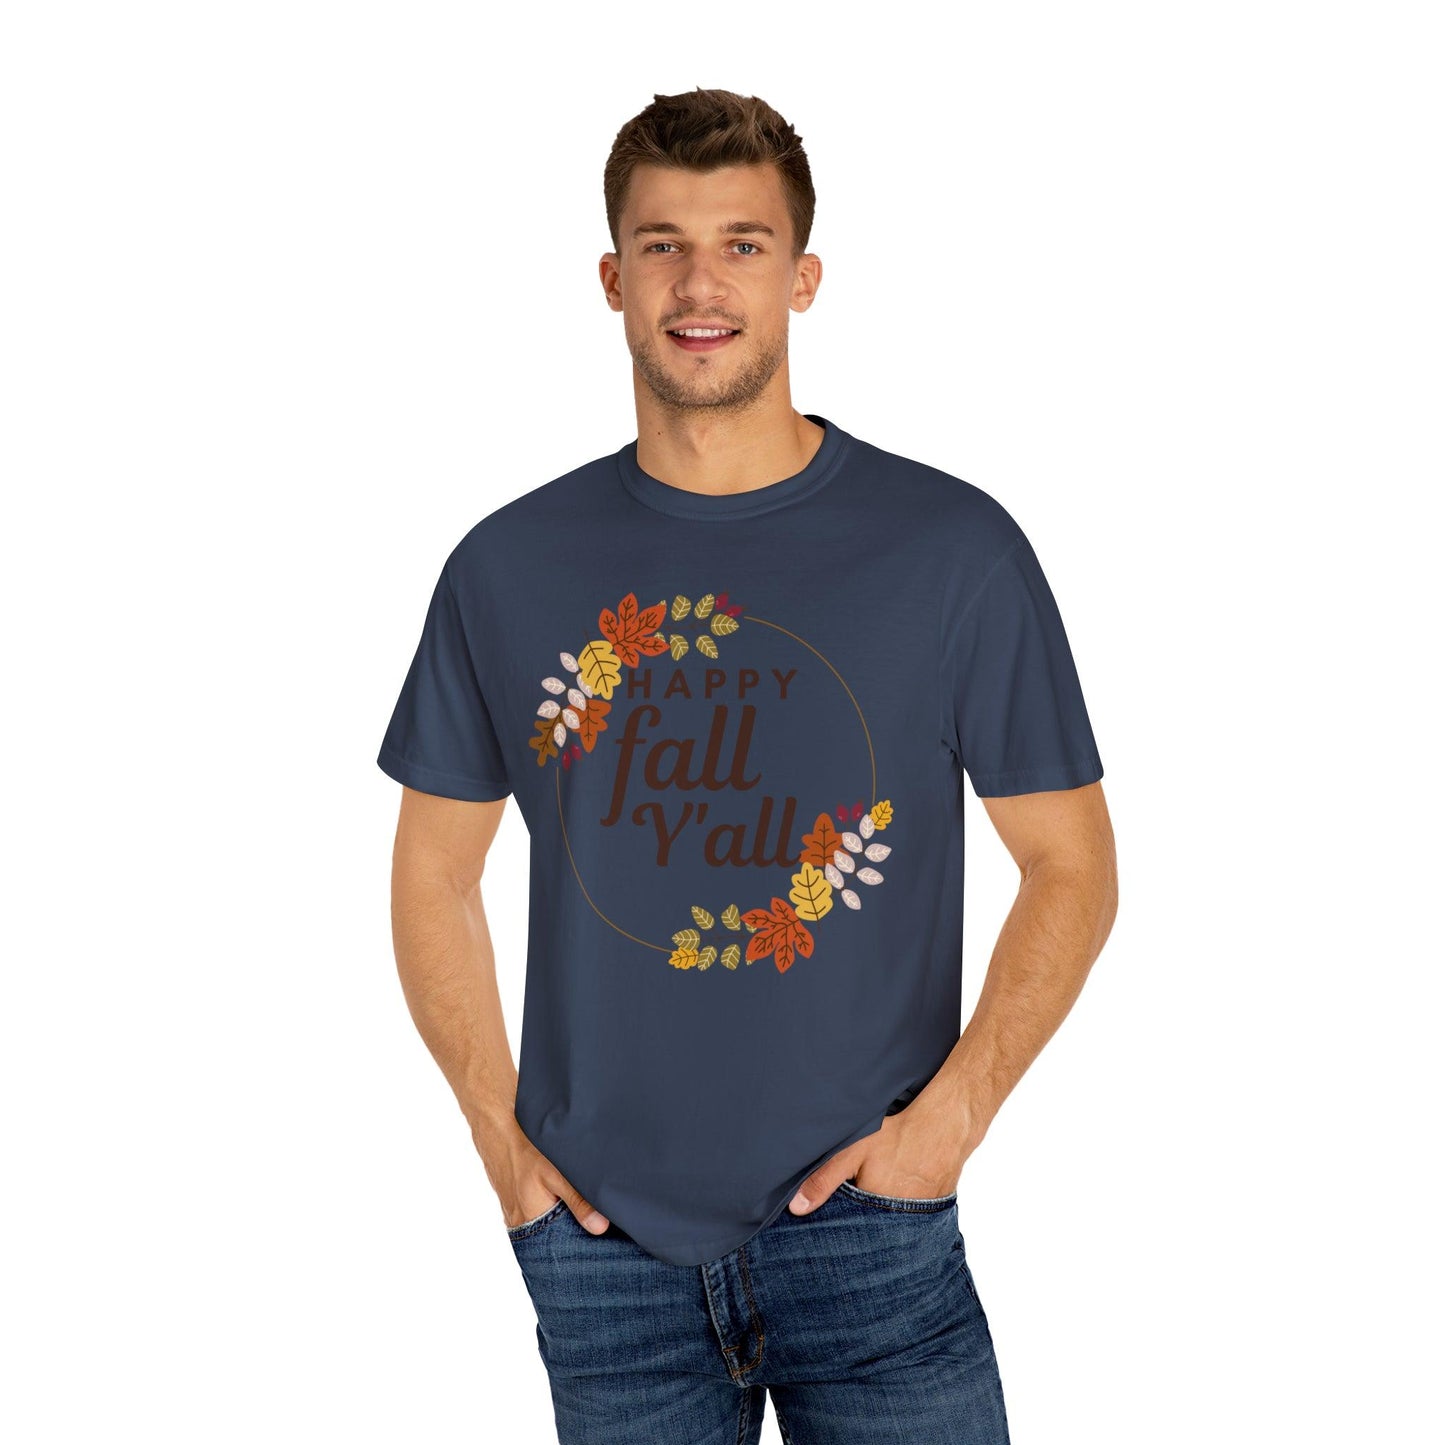 Happy Fall Y'all Gift for Fall, Funny Fall Shirts Gift, Autumn Tee, Fall Tshirt